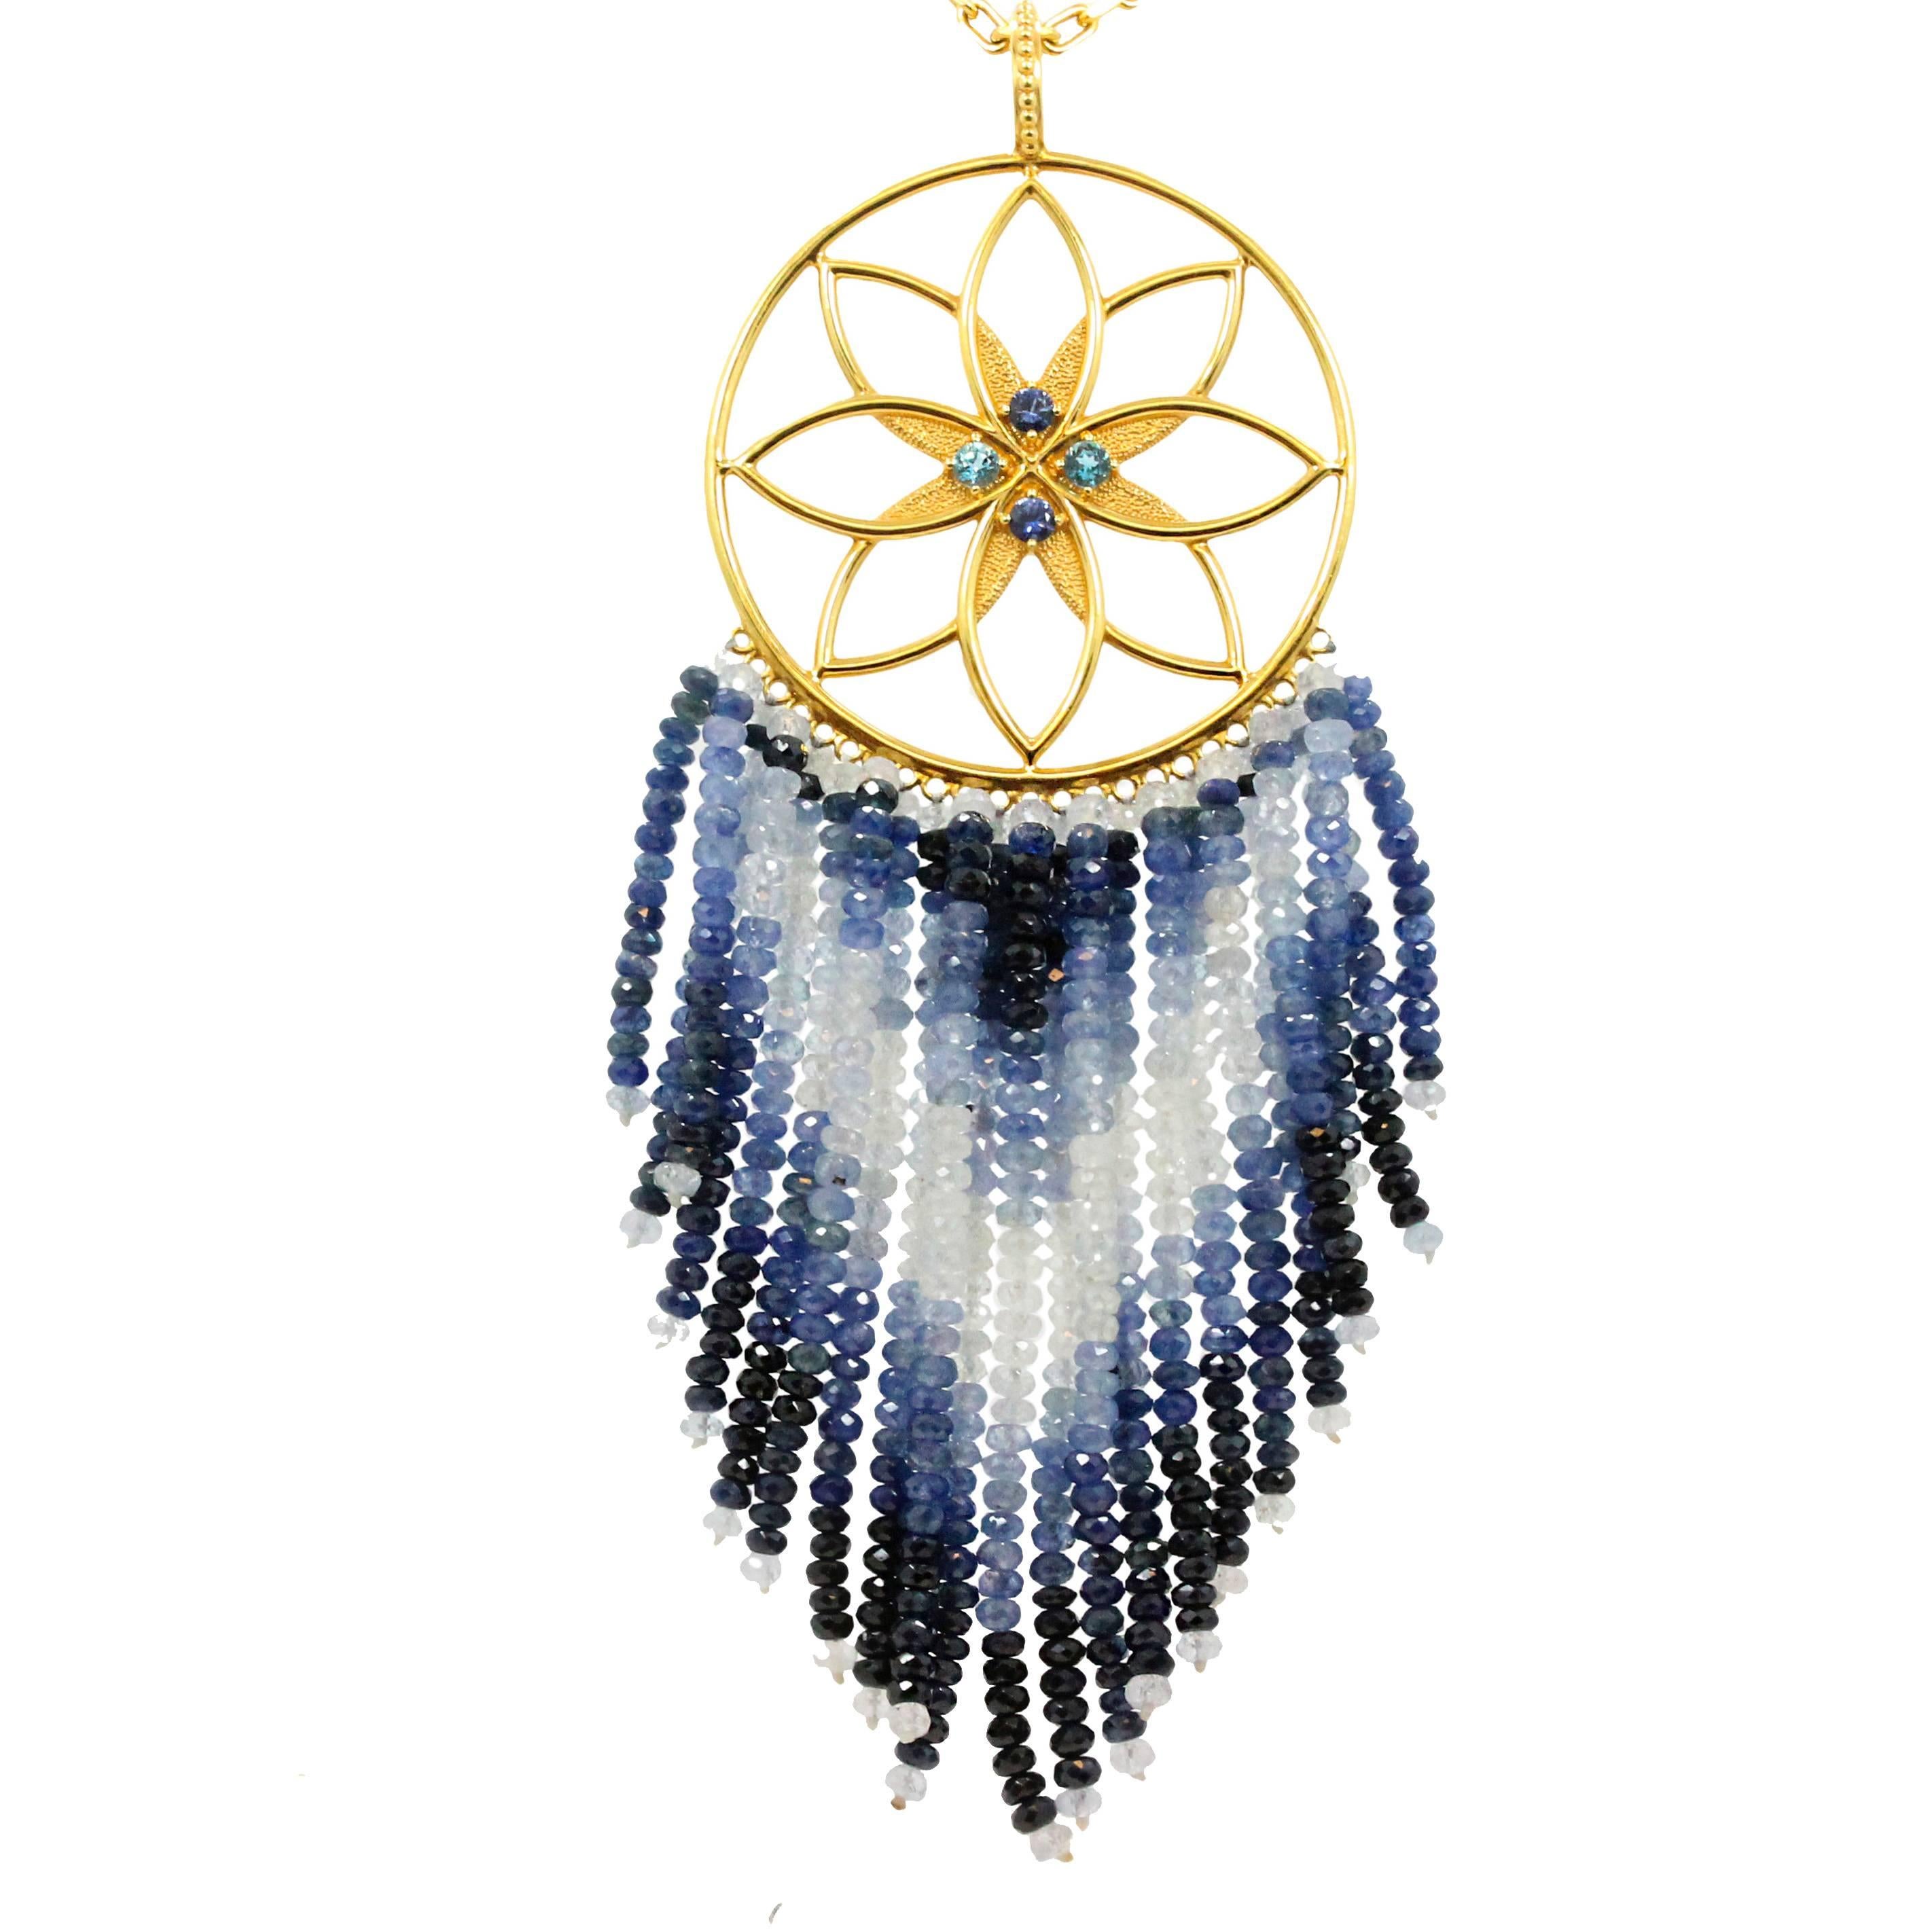 20K Yellow Gold Buddha Mama Dream Catcher Necklace With Faceted Moonstones and Sapphire Pendant.